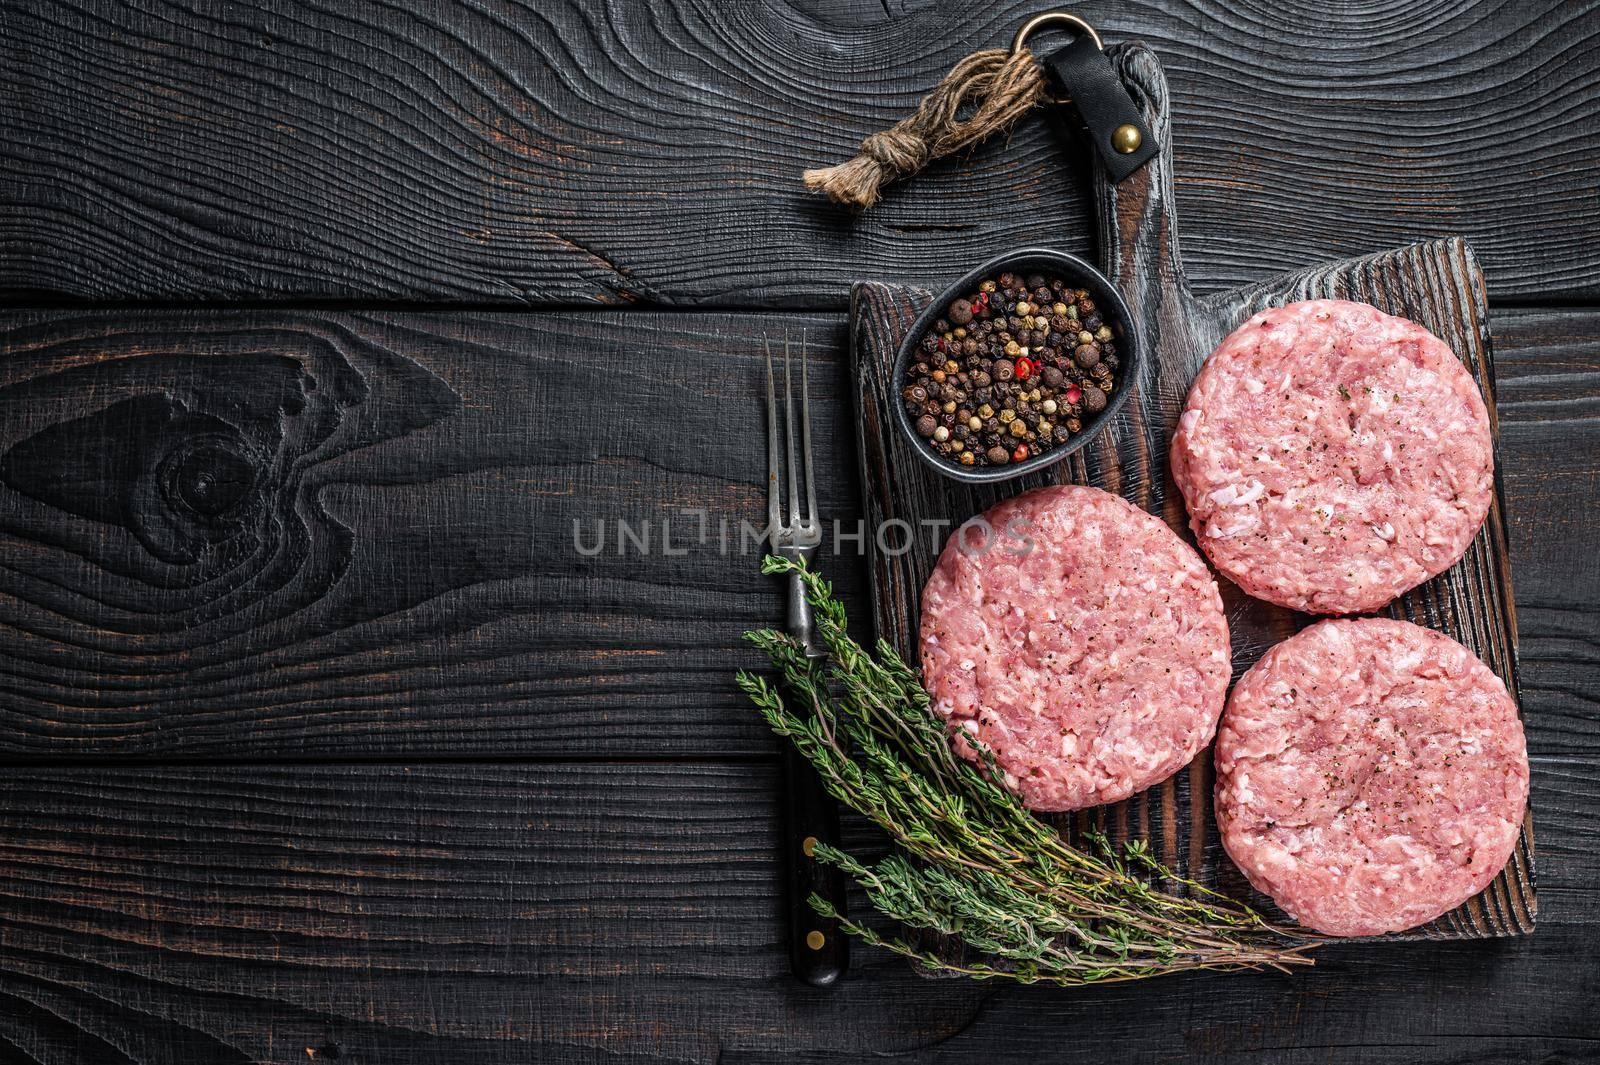 Raw chicken turkey patty, ground meat cutlets on a chopping Board. Black wooden background. Top view. Copy space by Composter